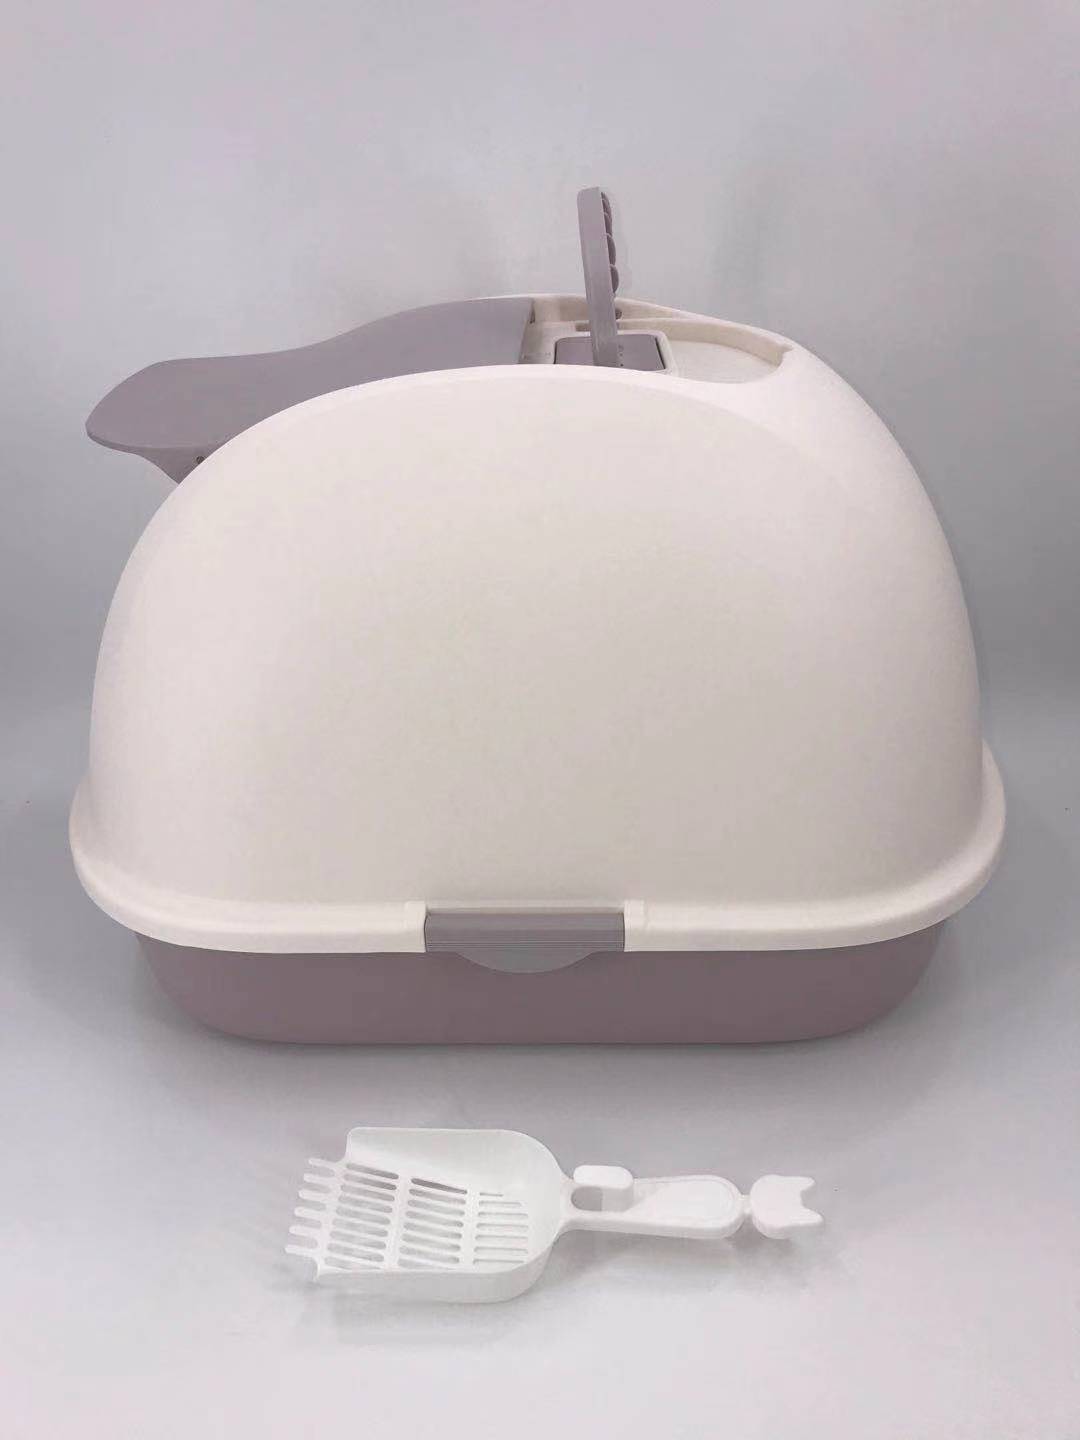 YES4PETS XL Portable Hooded Cat Toilet Litter Box Tray House w Charcoal Filter and Scoop White